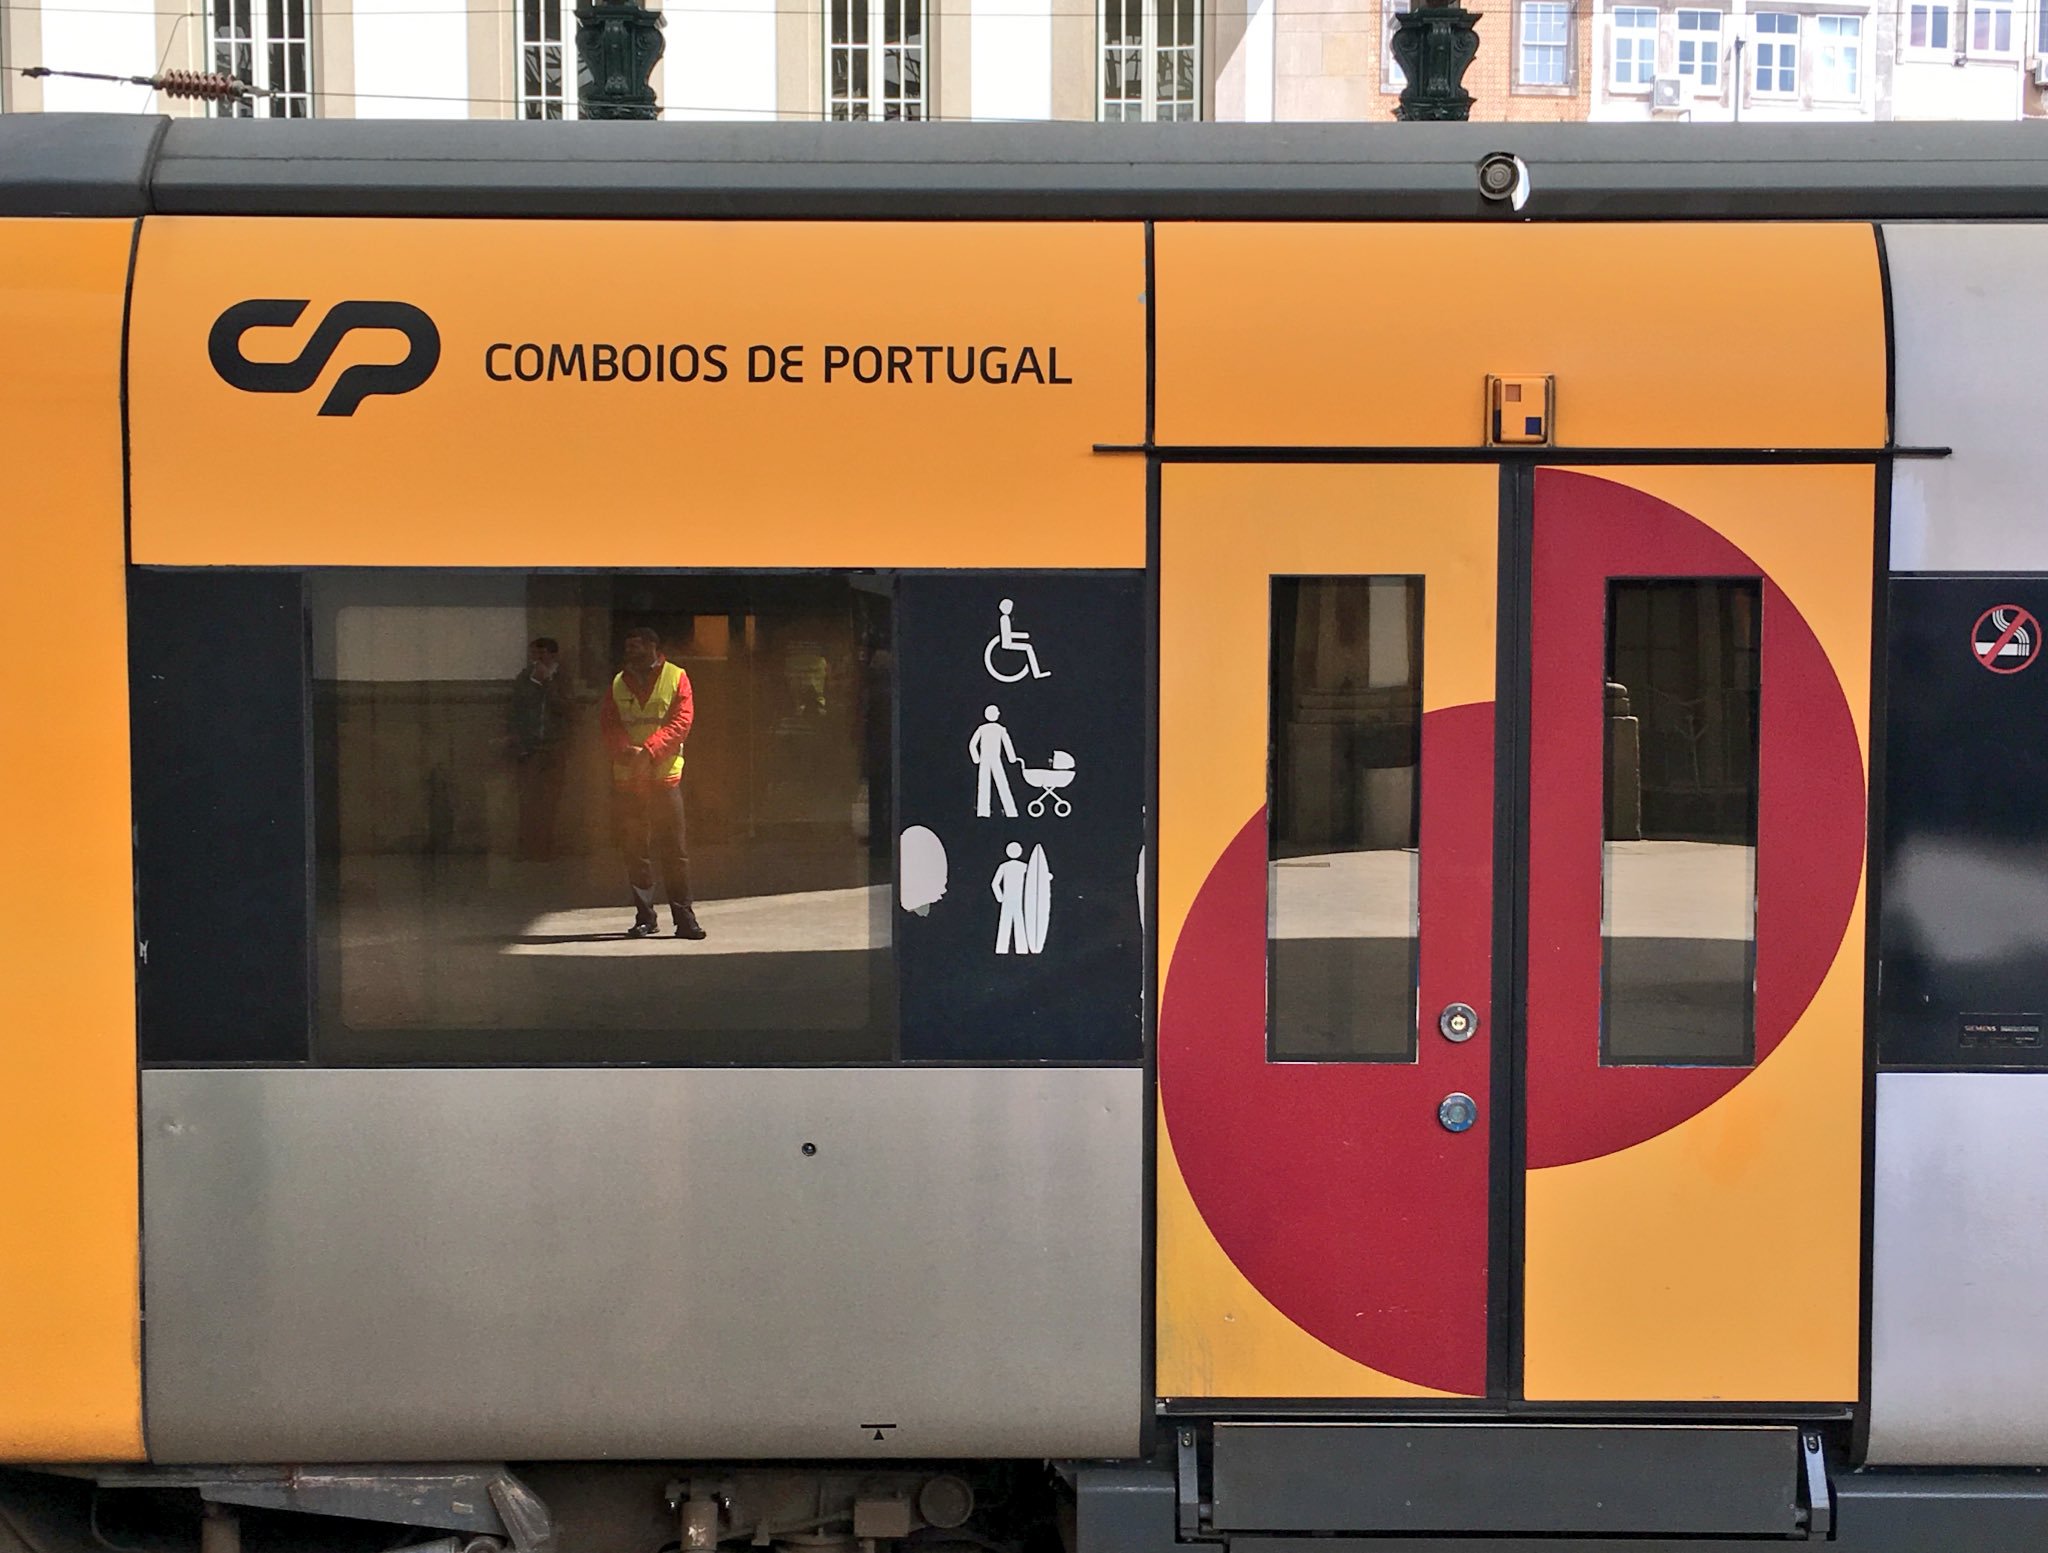 Portugese train car reserved for wheelchairs, prams, and surfboards. 🏄 https://t.co/XvA0FdpYzX